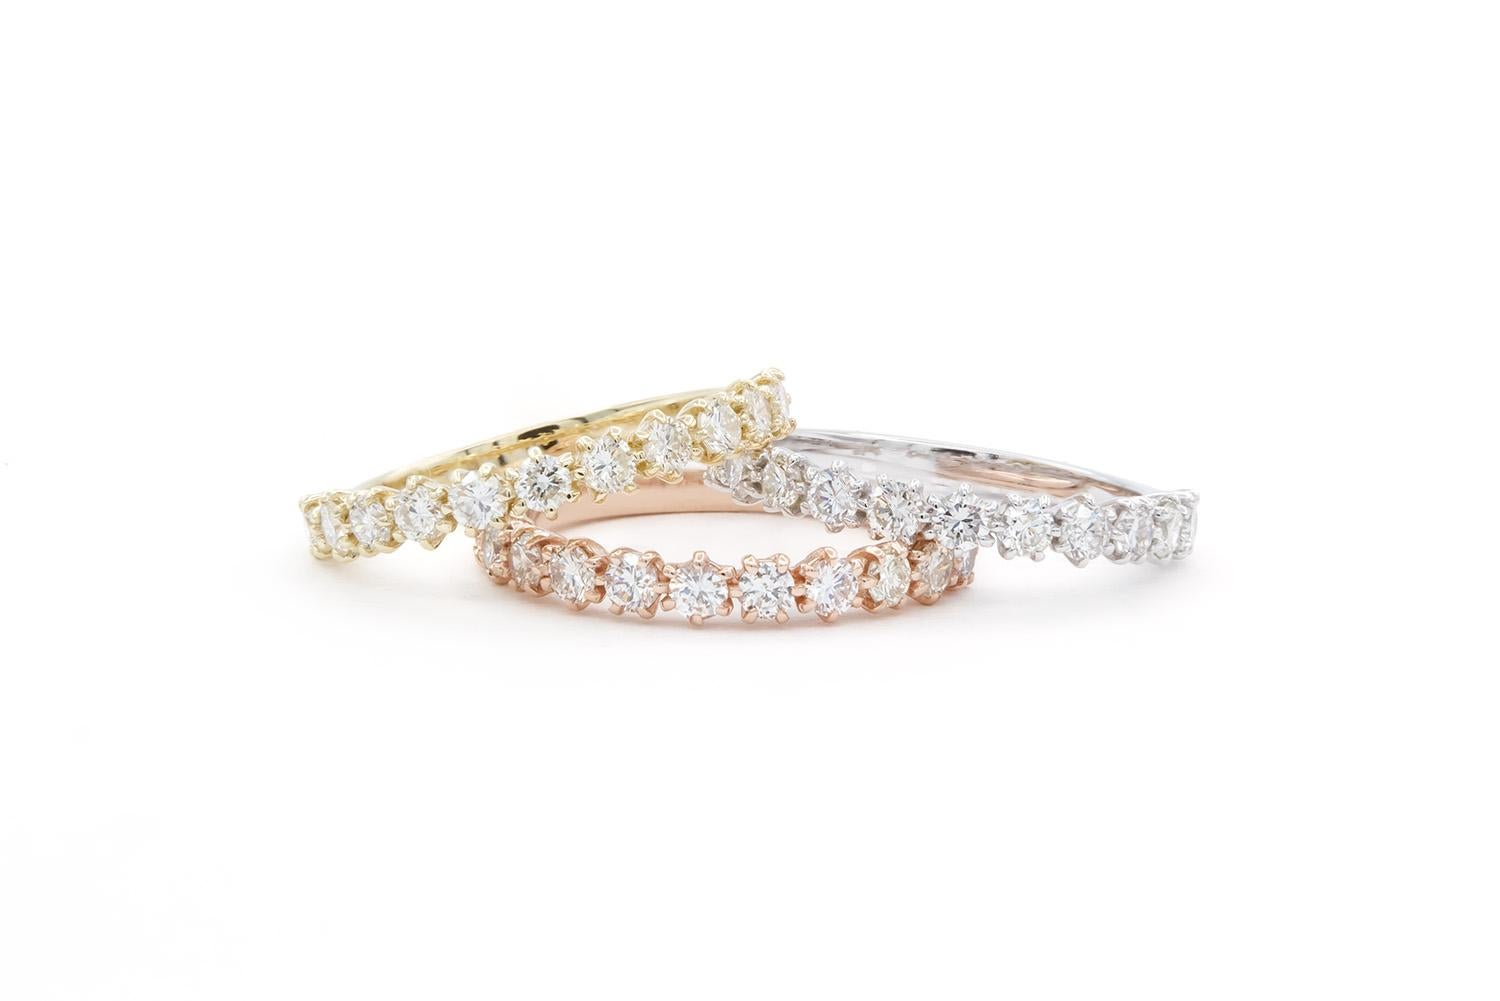 We are pleased to offer these 14k White Yellow & Rose Gold Diamond Stacking Fashion Rings. They feature 1.55ctw G-H/VS-SI Round Brilliant Cut Diamonds set in 14k gold. They are size 5.25 US and measures 3mm wide at the diamonds and 1.75 below the